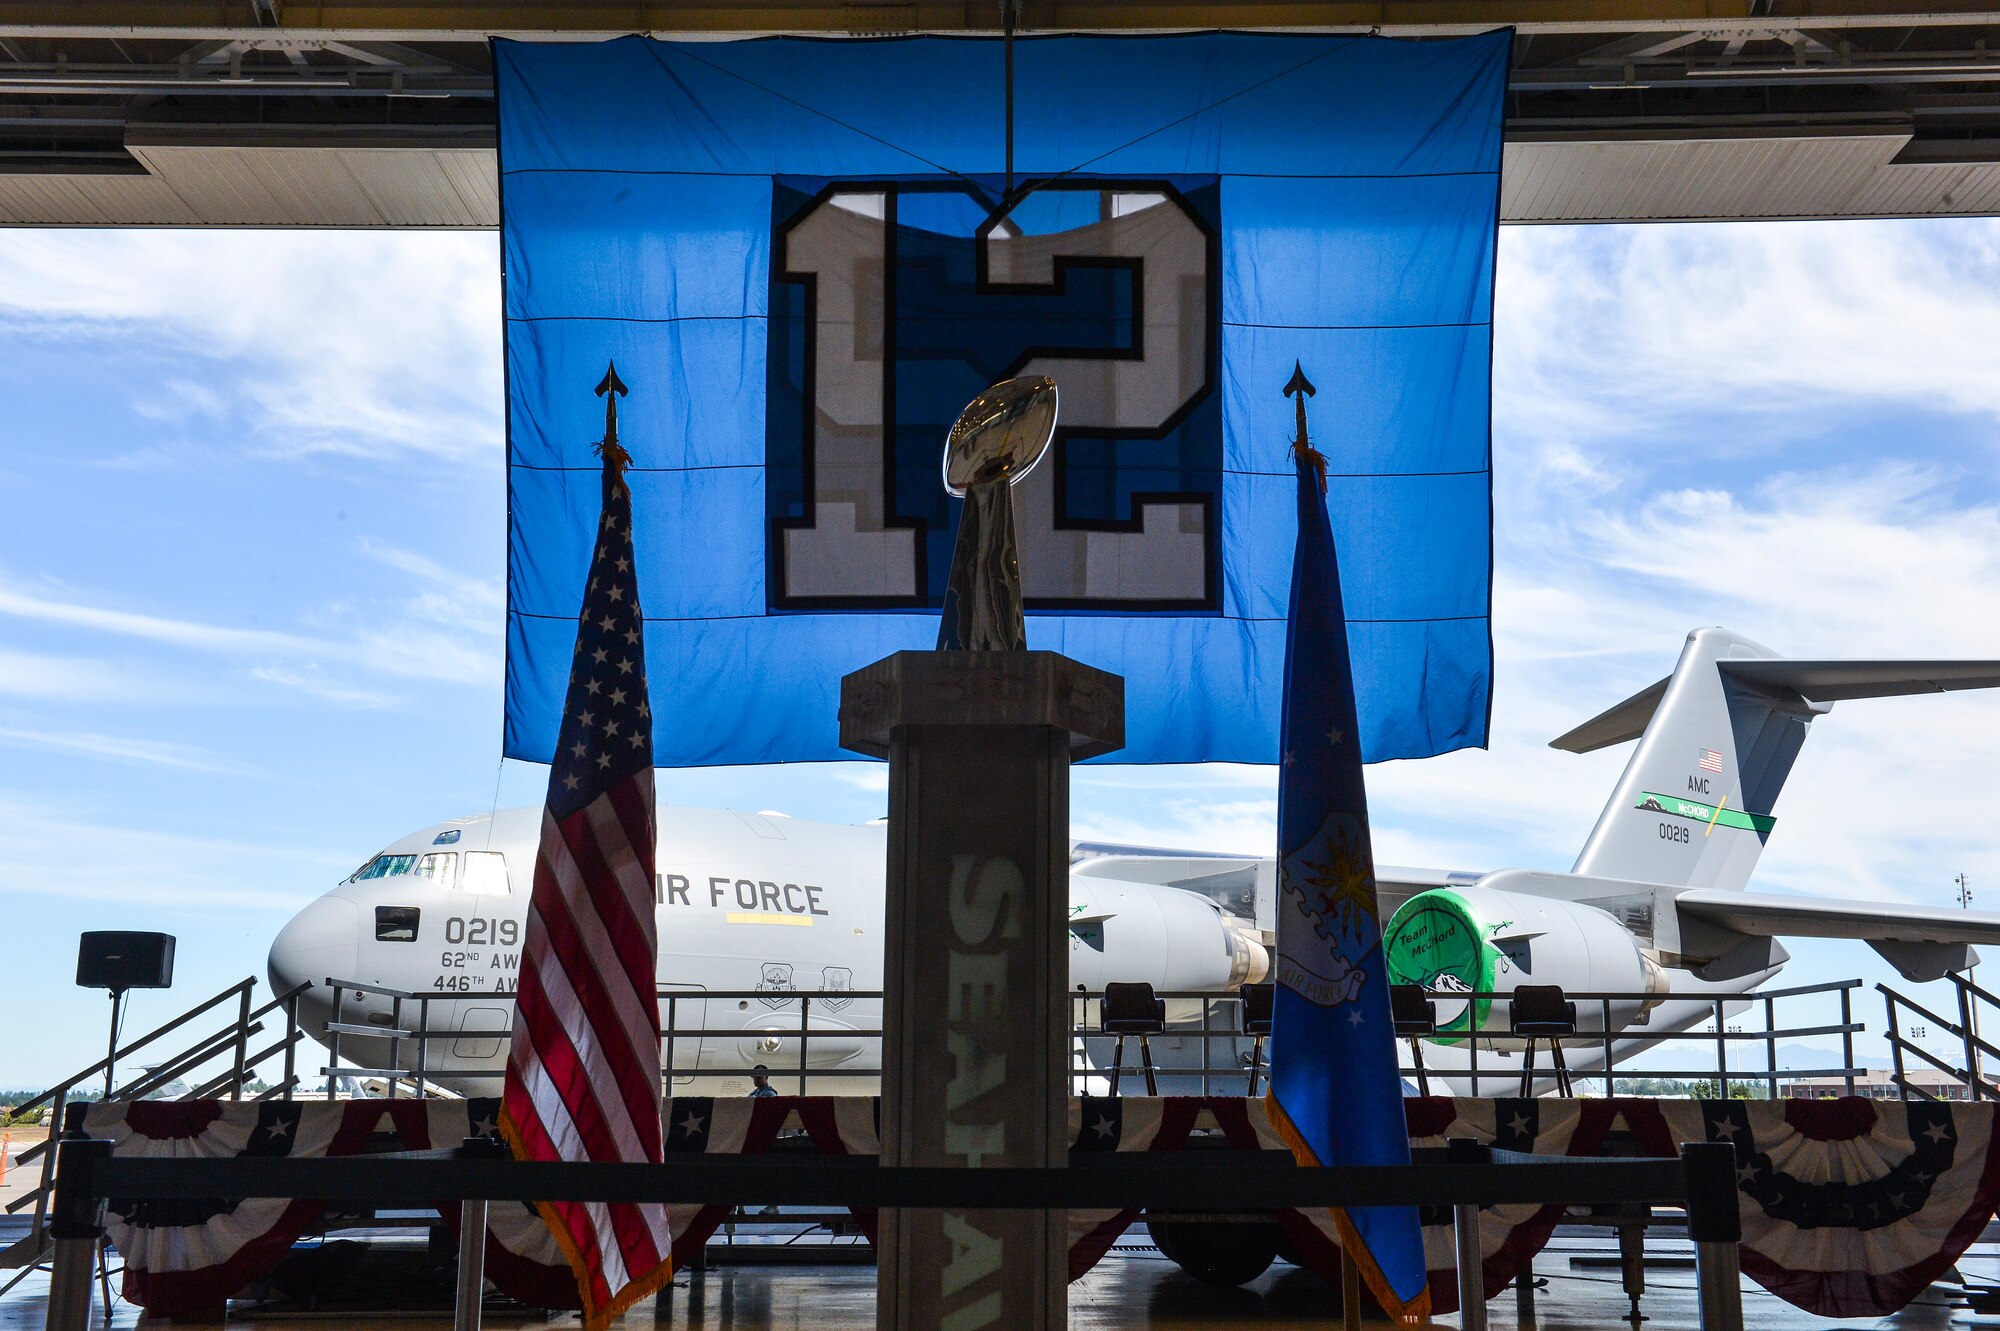 The Vince Lombardi Trophy sits upon a trophy case July 1, 2014, just before fans are let in to Hangar 9 during the 2014 Seattle Seahawks 12 Tour at Joint Base Lewis-McChord, Wash. The trophy was awarded to the Seahawks after winning Super Bowl XLVIII earlier this year. (U.S. Air Force photo/Staff Sgt. Russ Jackson)